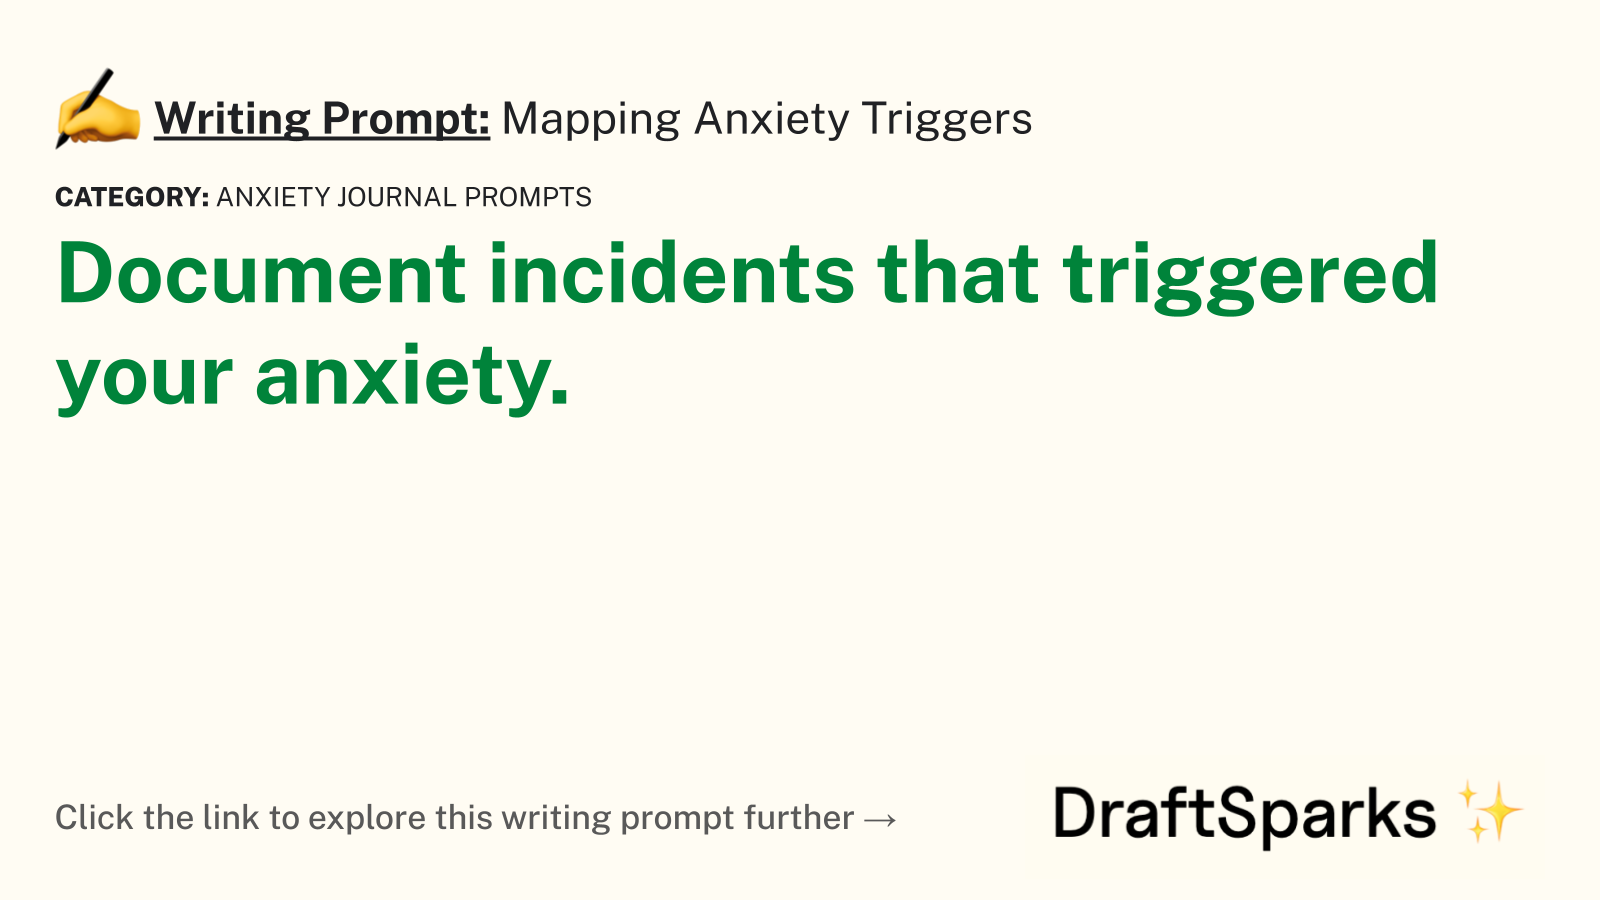 Mapping Anxiety Triggers